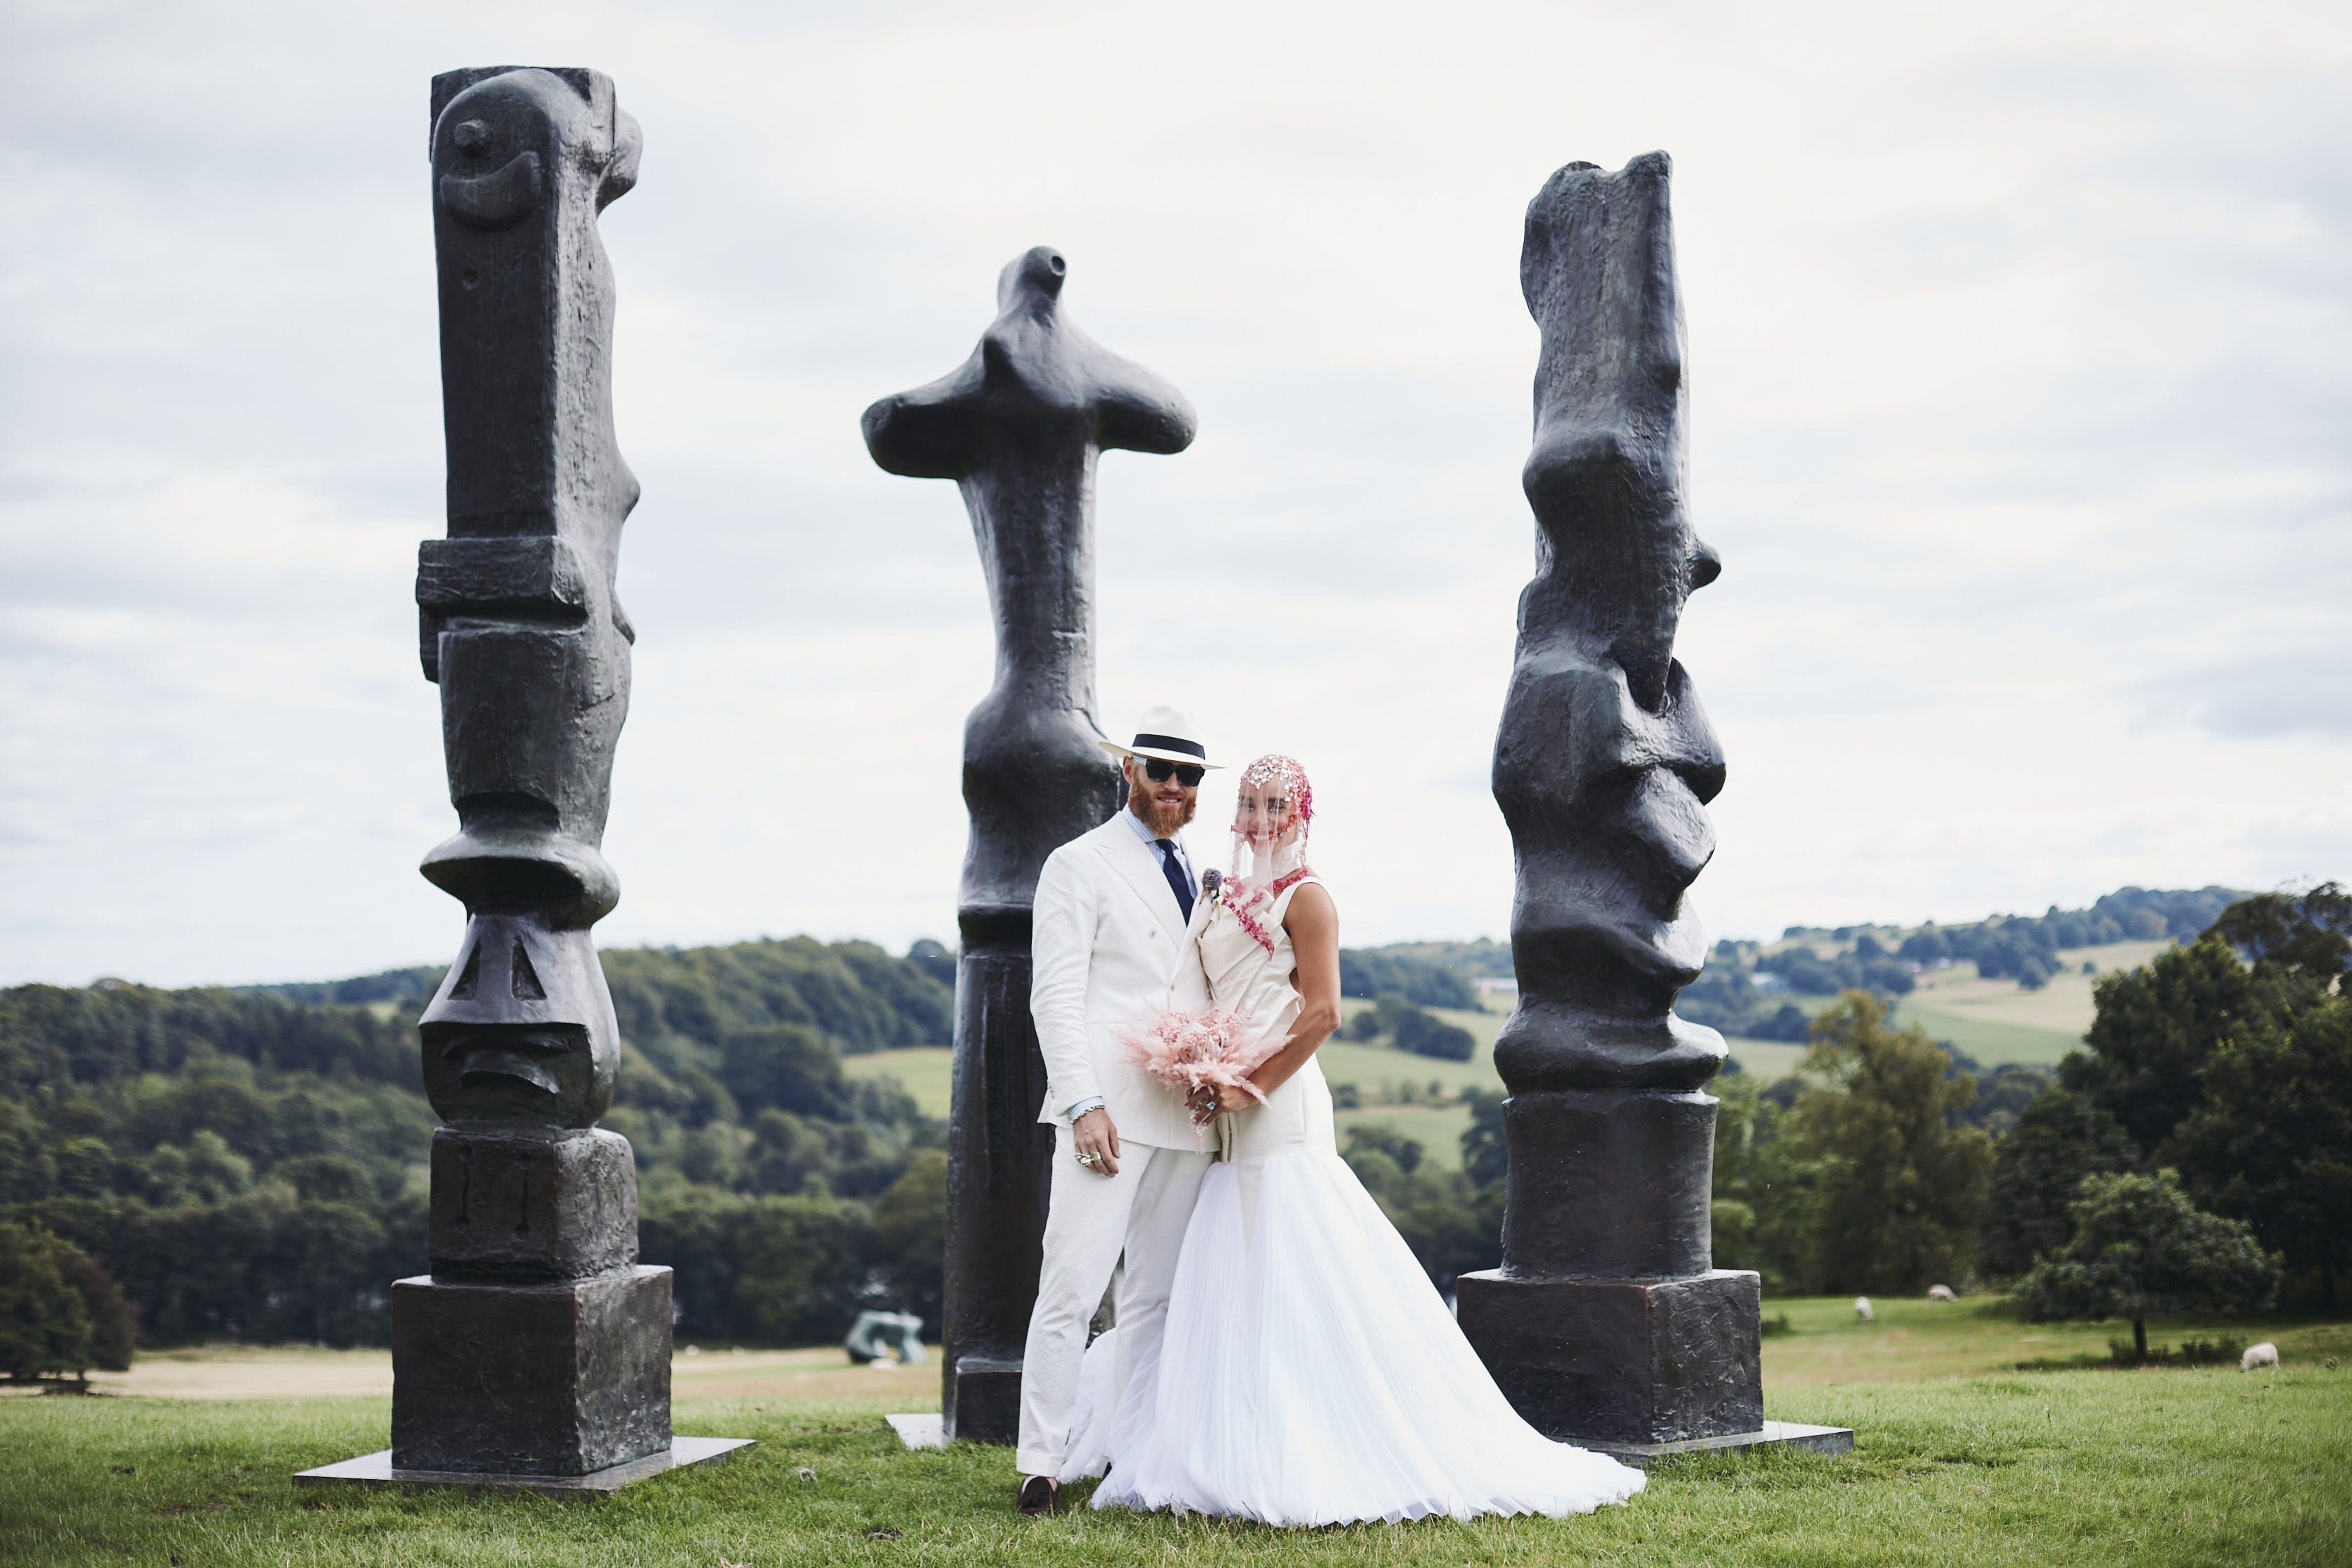 A bride and groom, wearing a long white dress and white suit, standing in front of three tall thin bronze sculptures outdoors